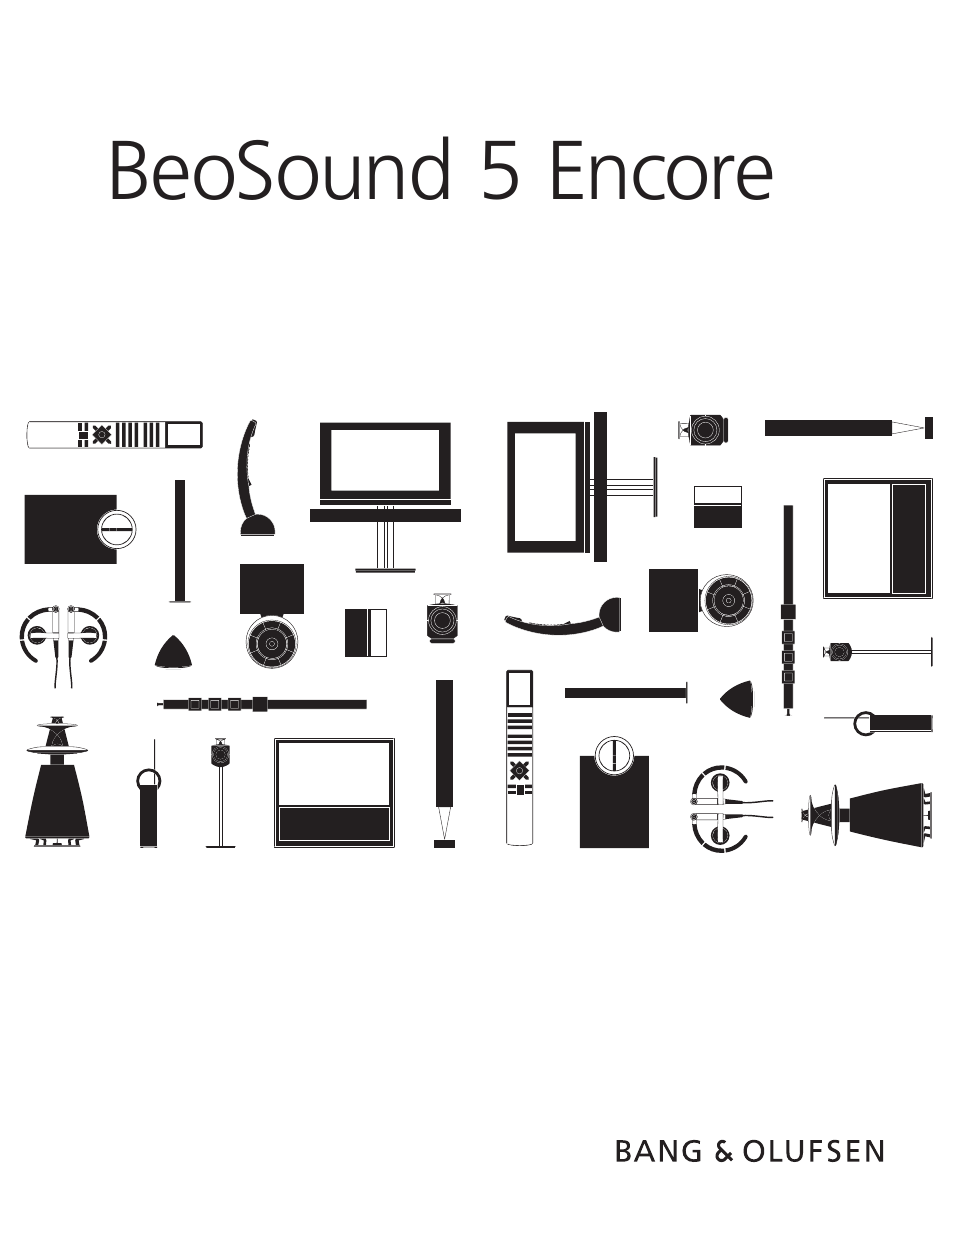 Bang & Olufsen BeoSound 5 Encore - Getting Started Manuale d'uso | Pagine: 24